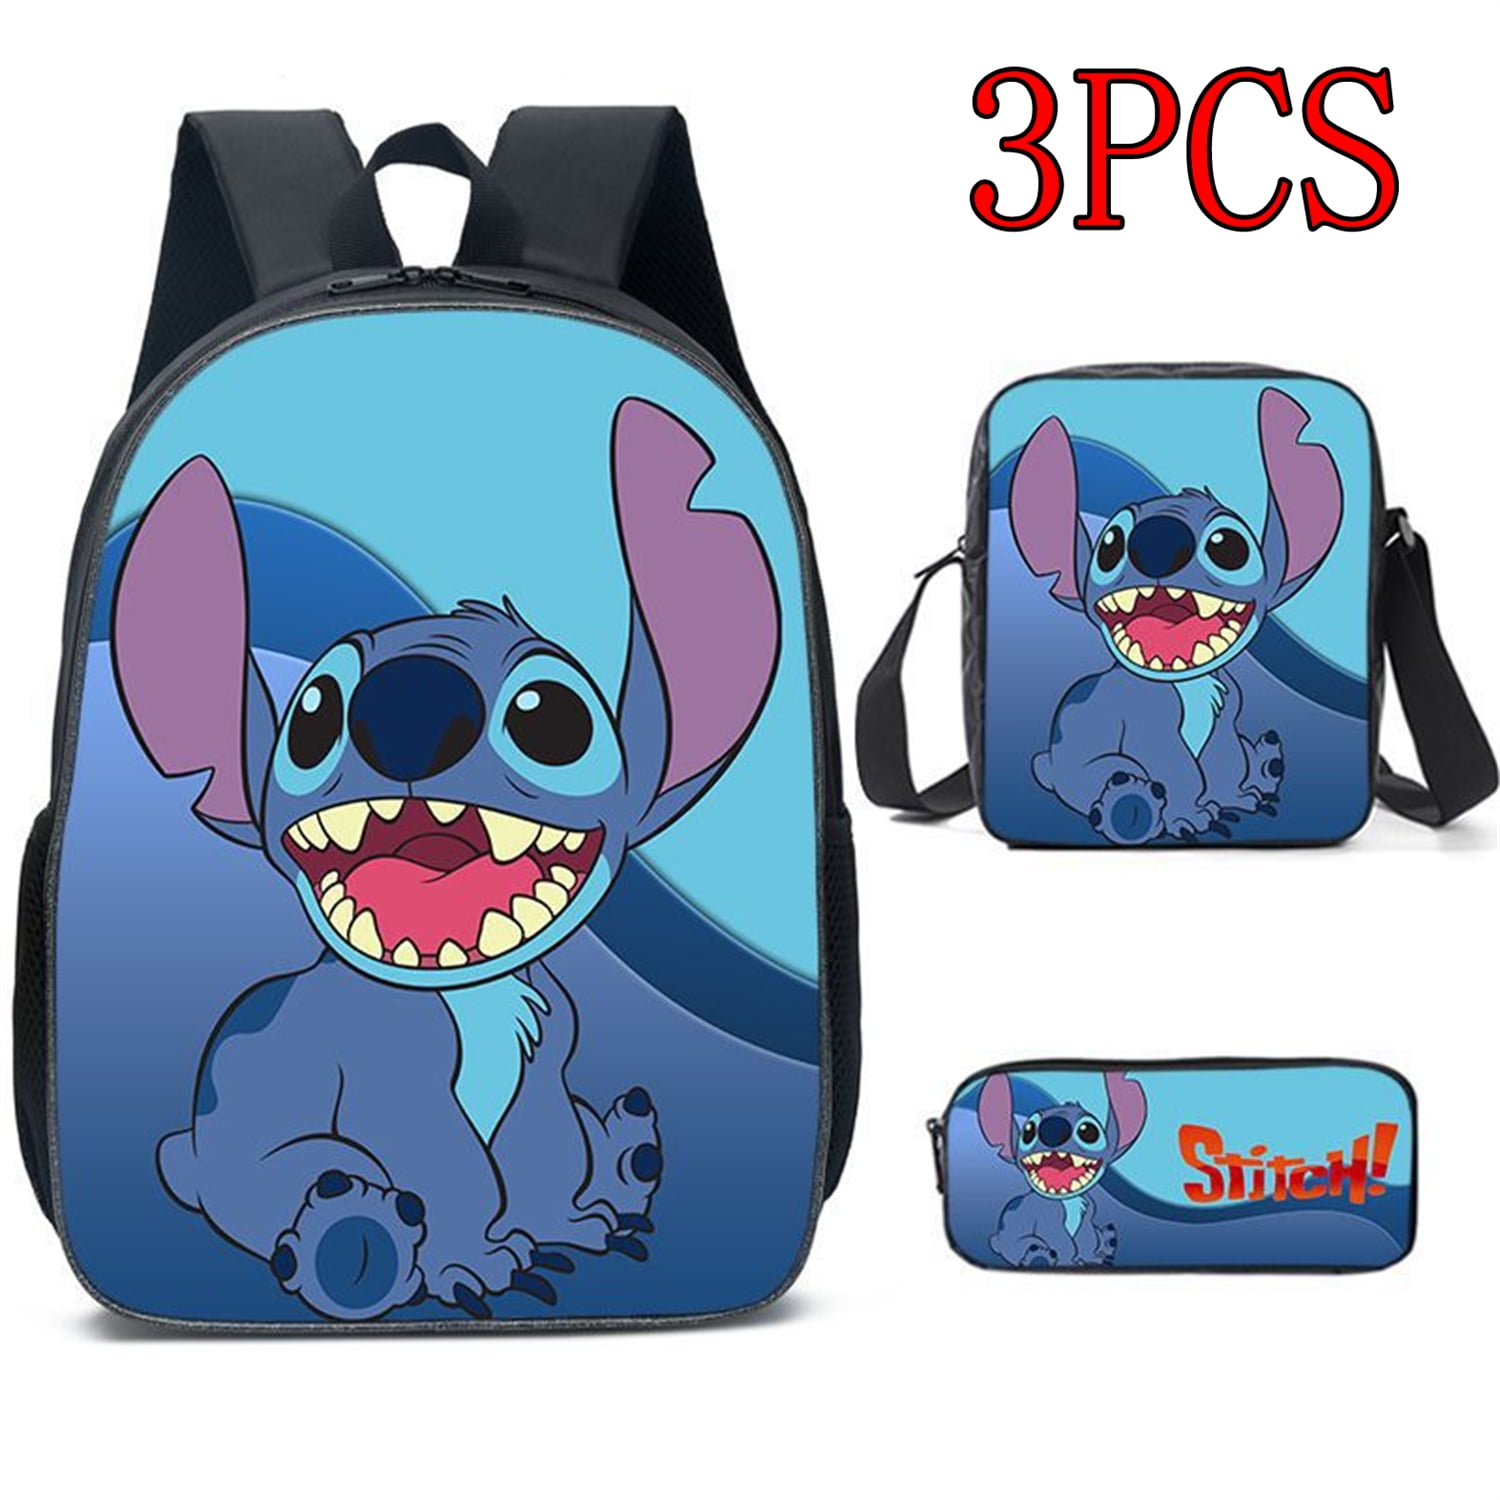 New 3pcs Stitch Backpack Pen Case Lunch Bags Anime School Bags For Boys  Girls Gift Capacity Laptop School Mochilas